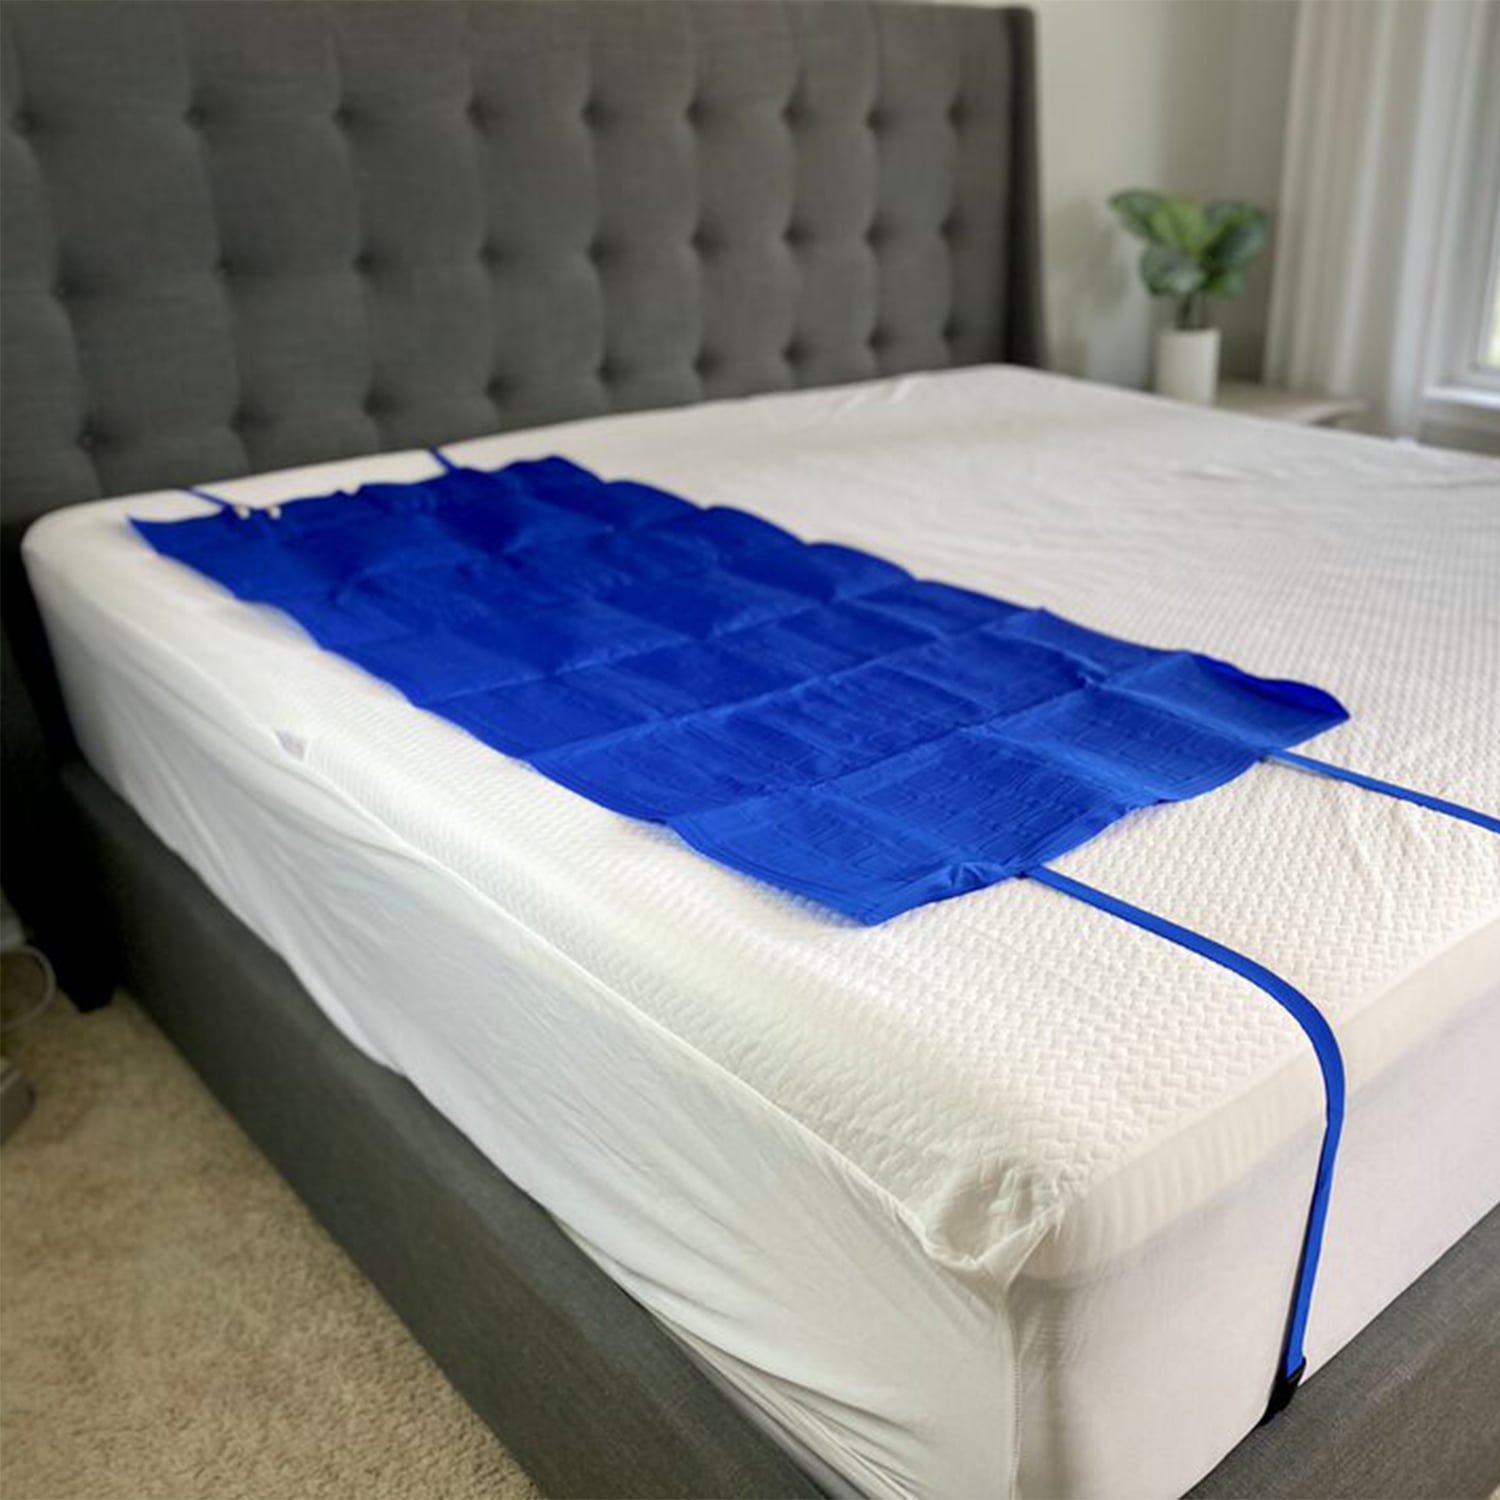 APENCHREN Cooling Water Mattress, Cooler Pad, Ice Mattress, Cooling Bed  Conditioning System - for Home, Dorm Room, Apartment and Hostel, Cool in